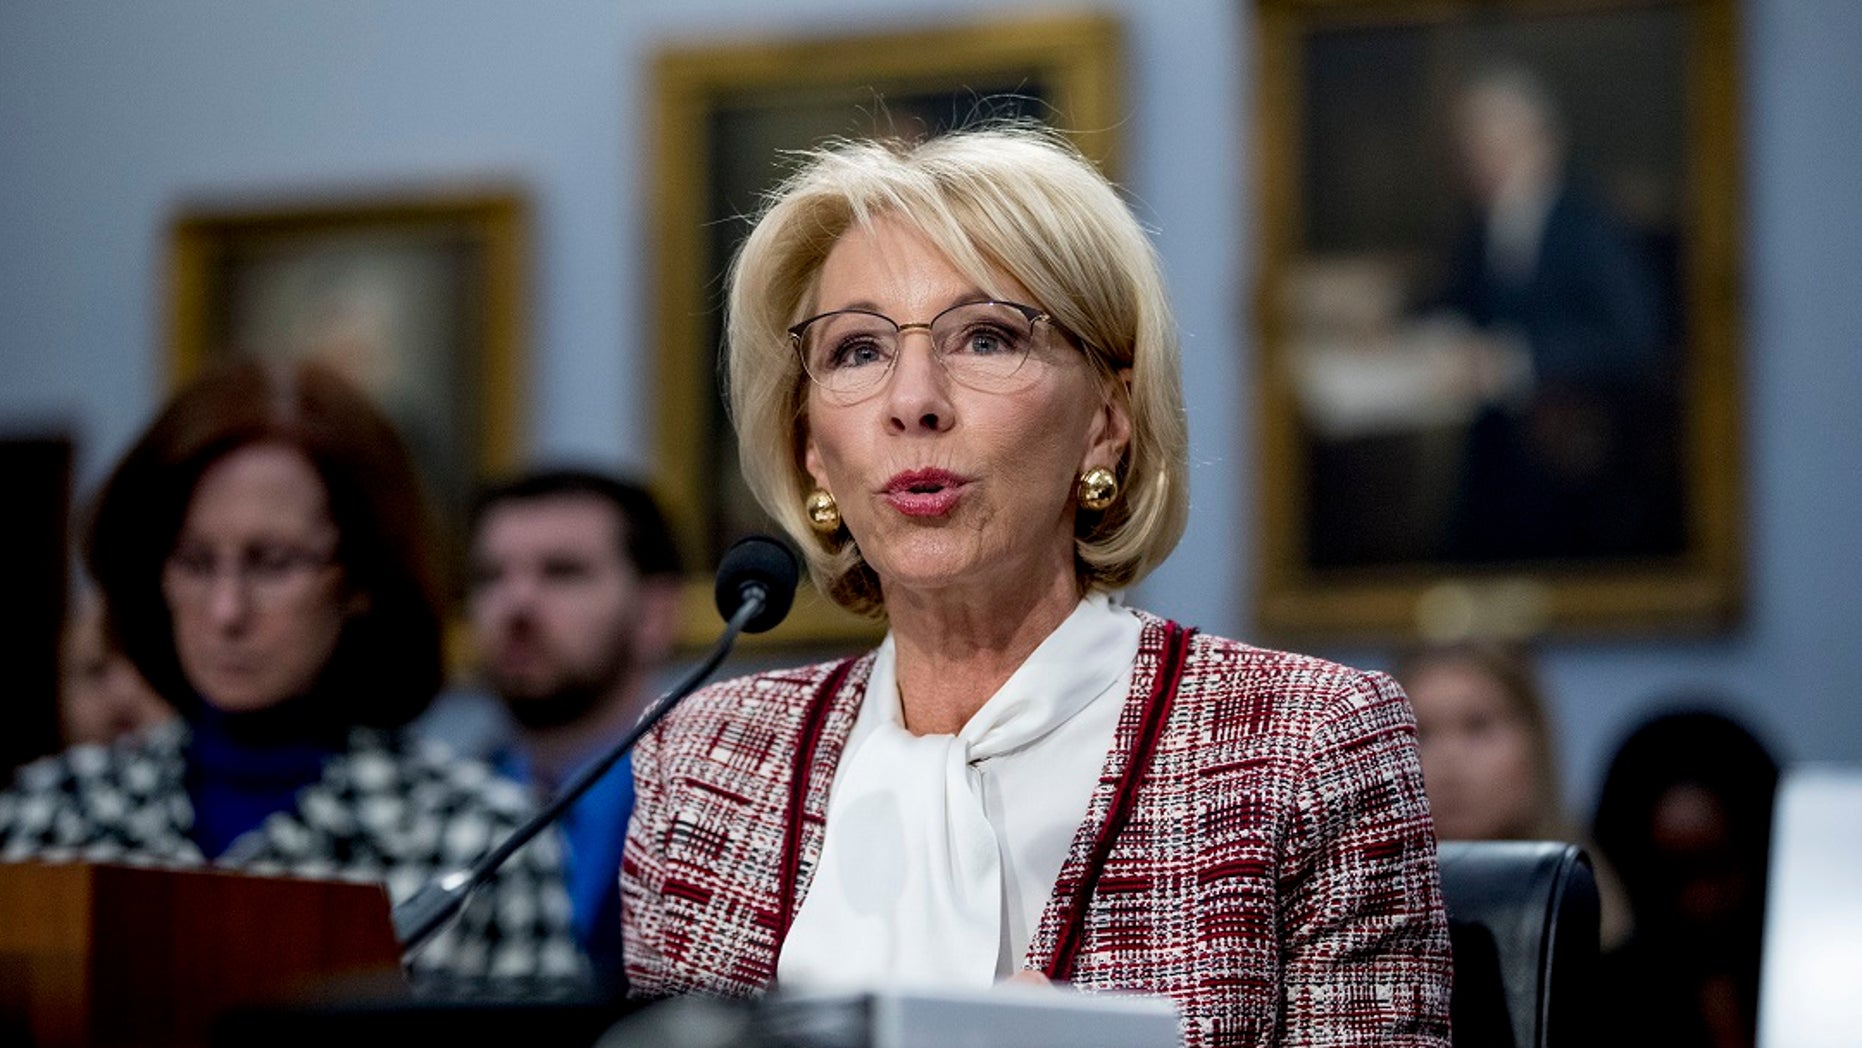 Education Secretary, Betsy DeVos, speaks at a House Budget Credits Subcommittee hearing on Capitol Hill, Washington, on March 26, 2019. (Associated Press)